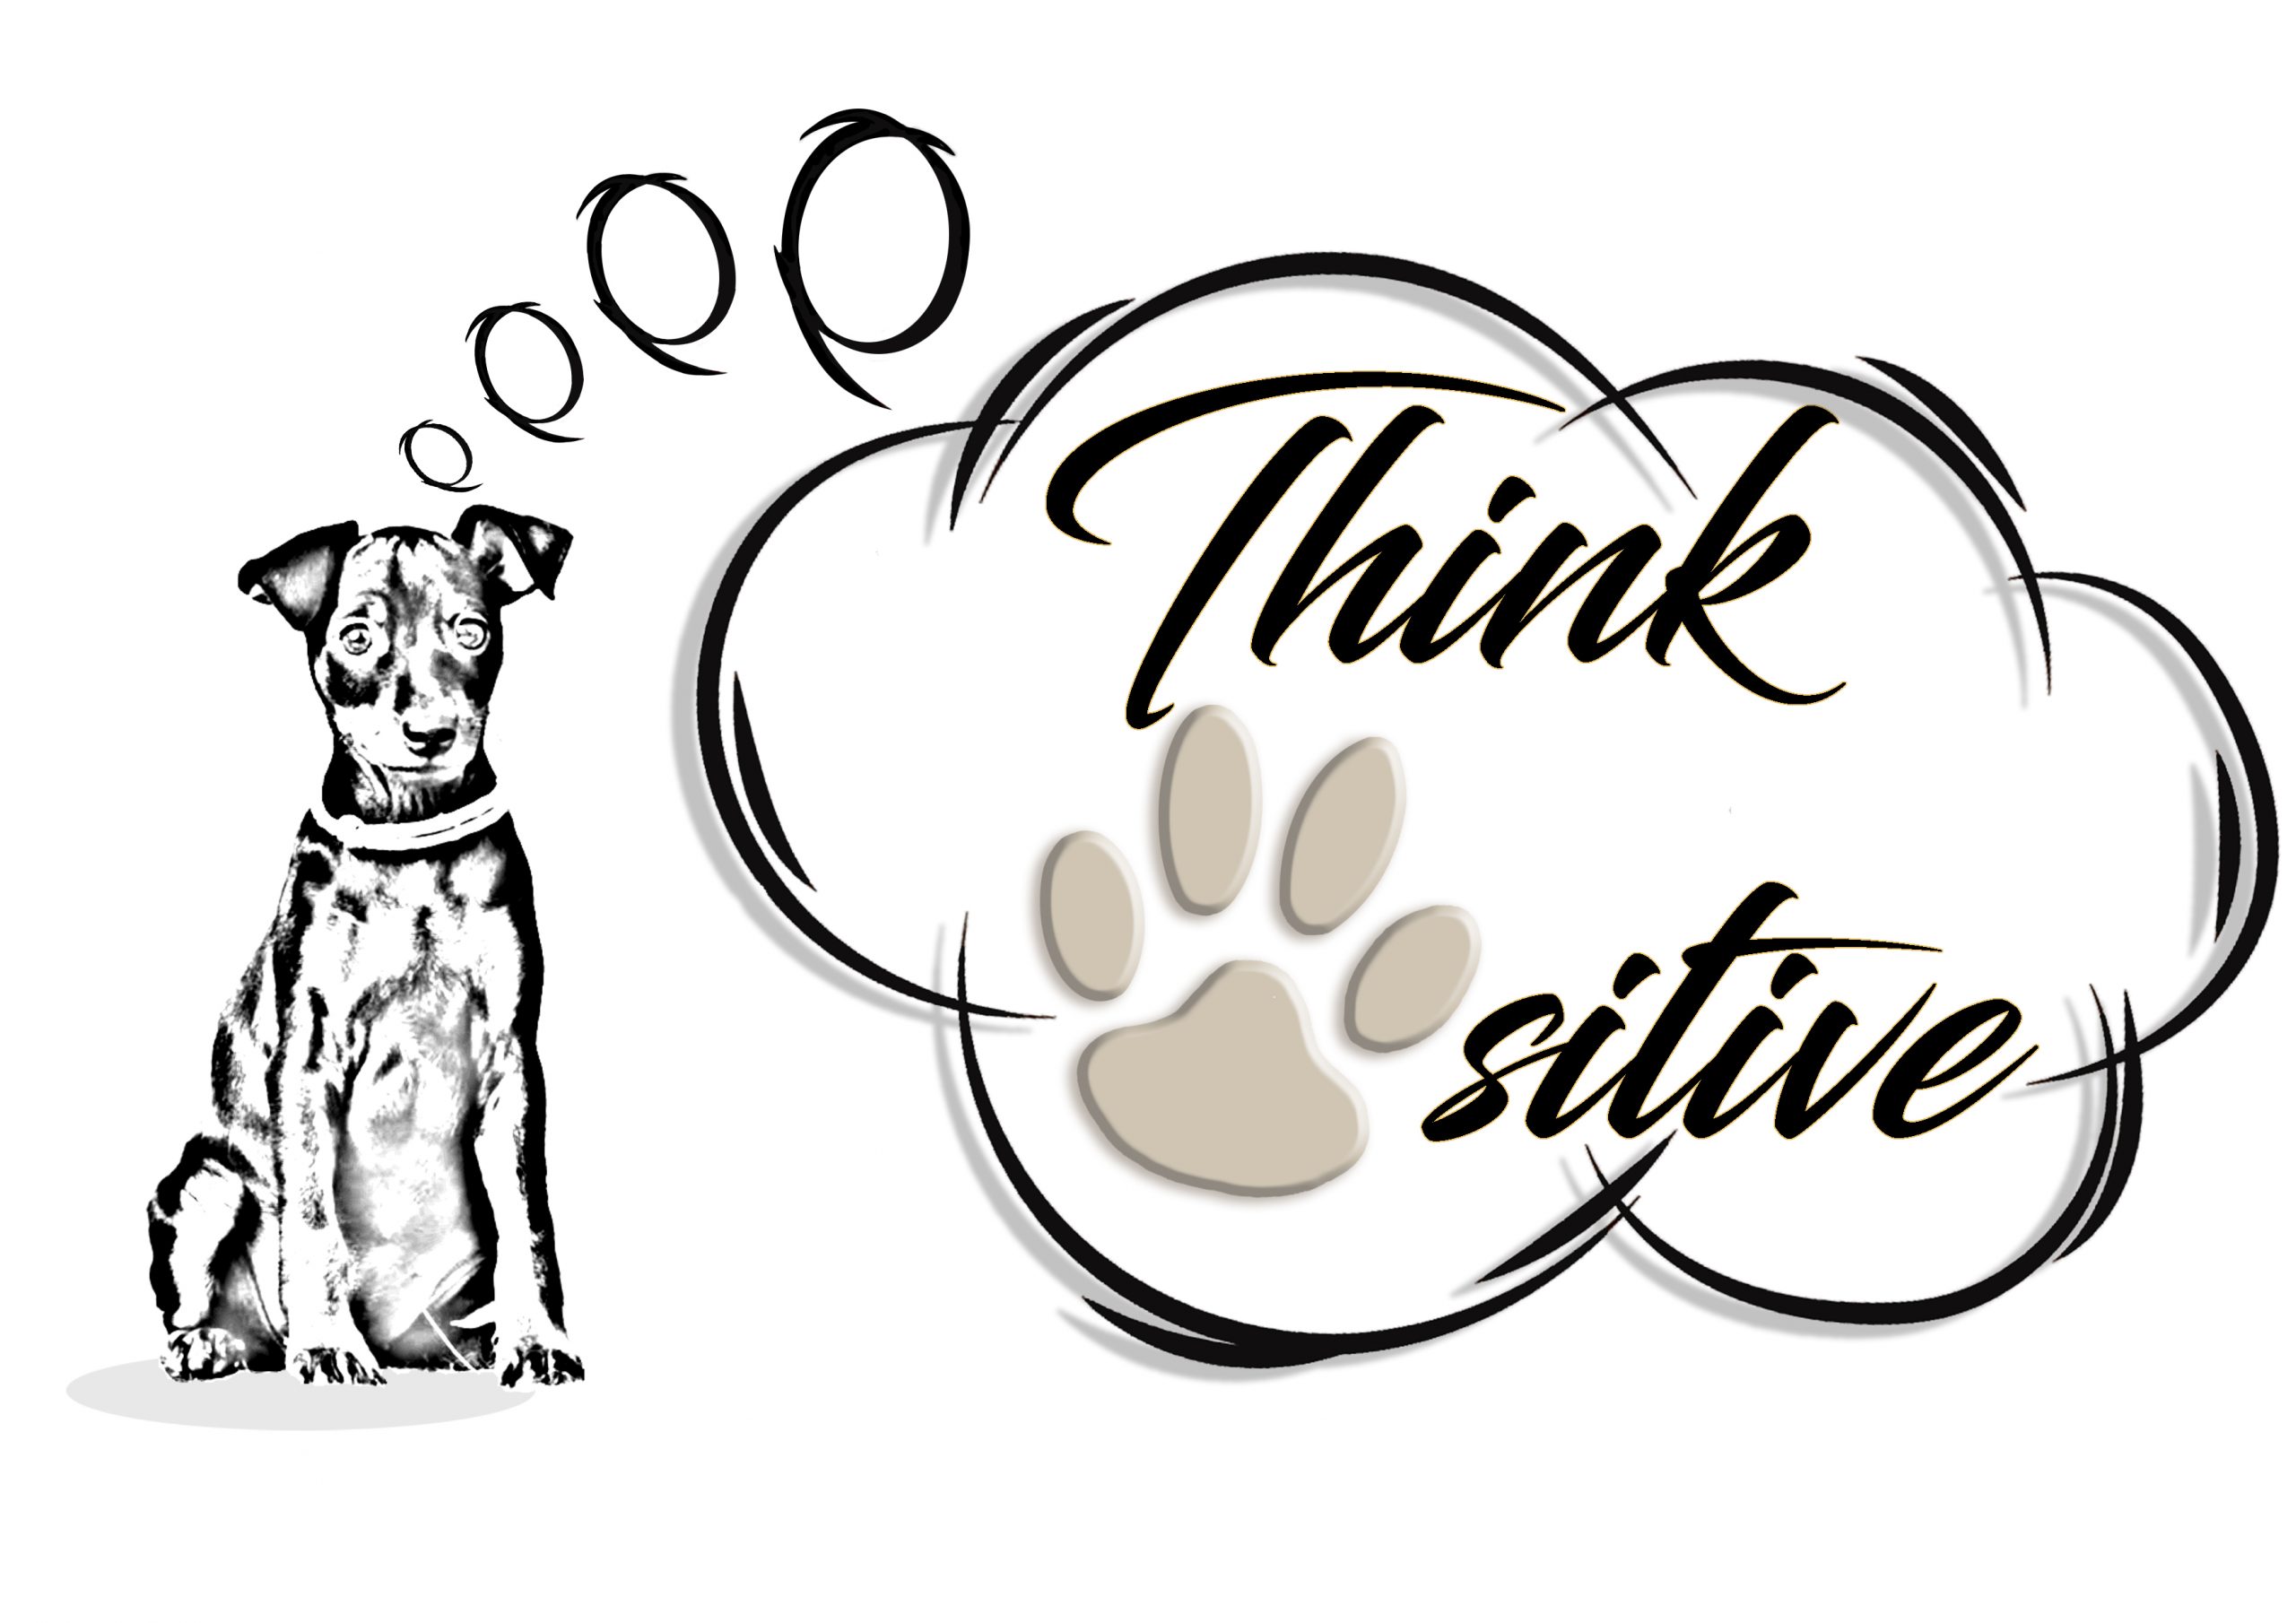 Think Pawsitive